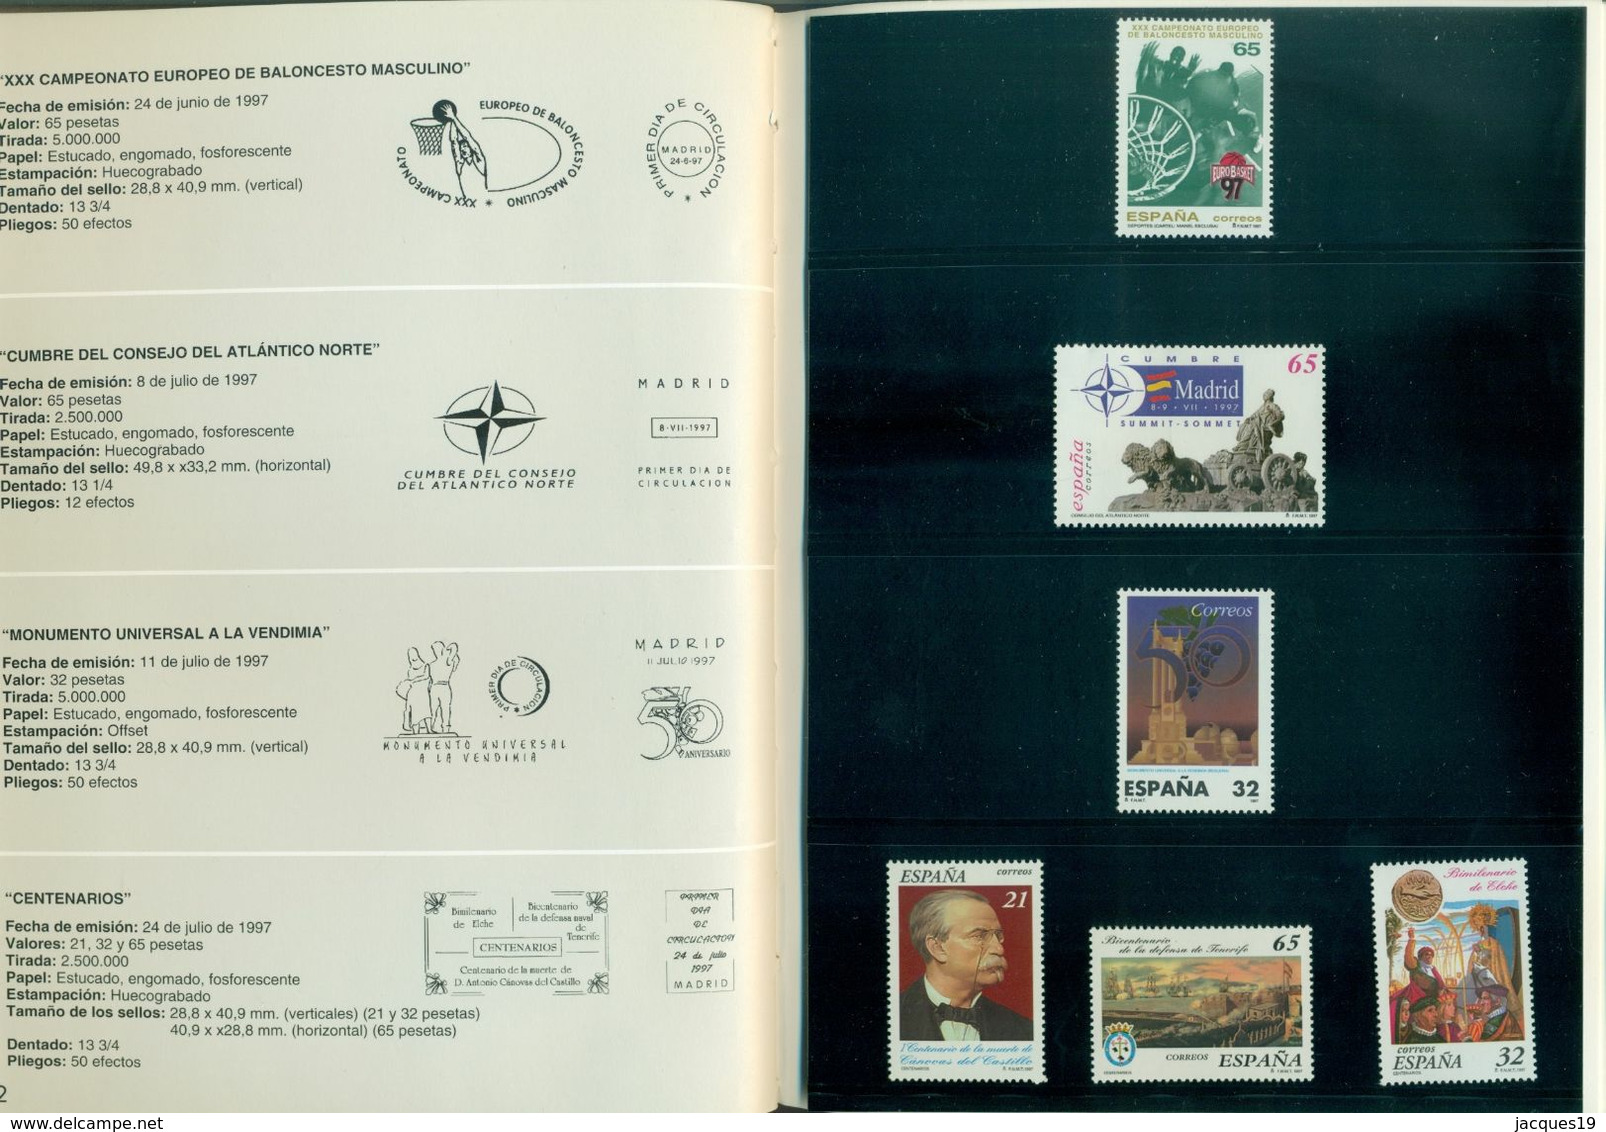 Year Book 1997 Spain (45 Stamps and 4 Blocks) and Andorre (5 Stamps) MNH